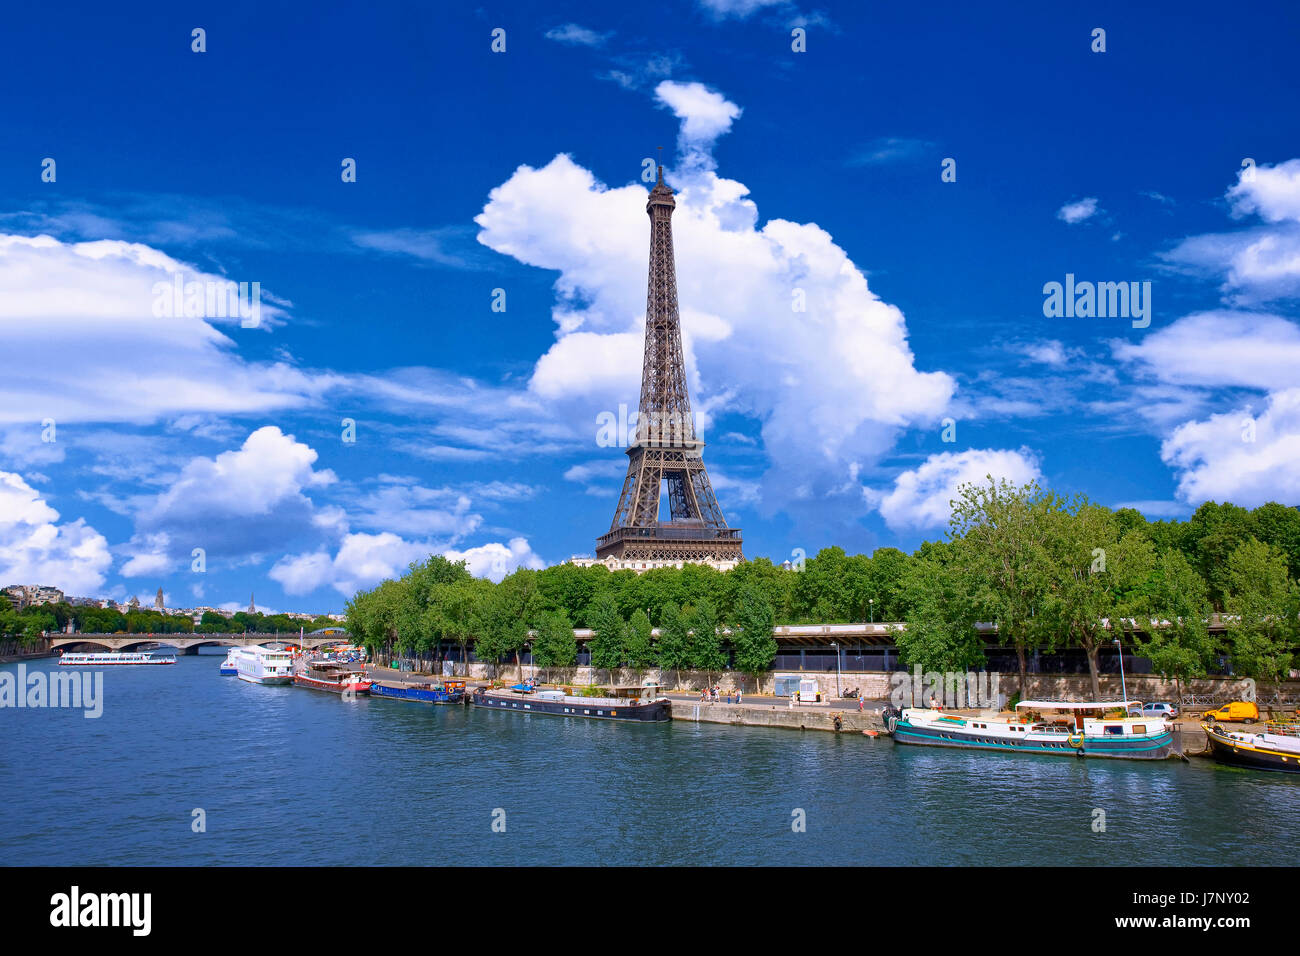 Eiffel tower and Seine river Stock Photo